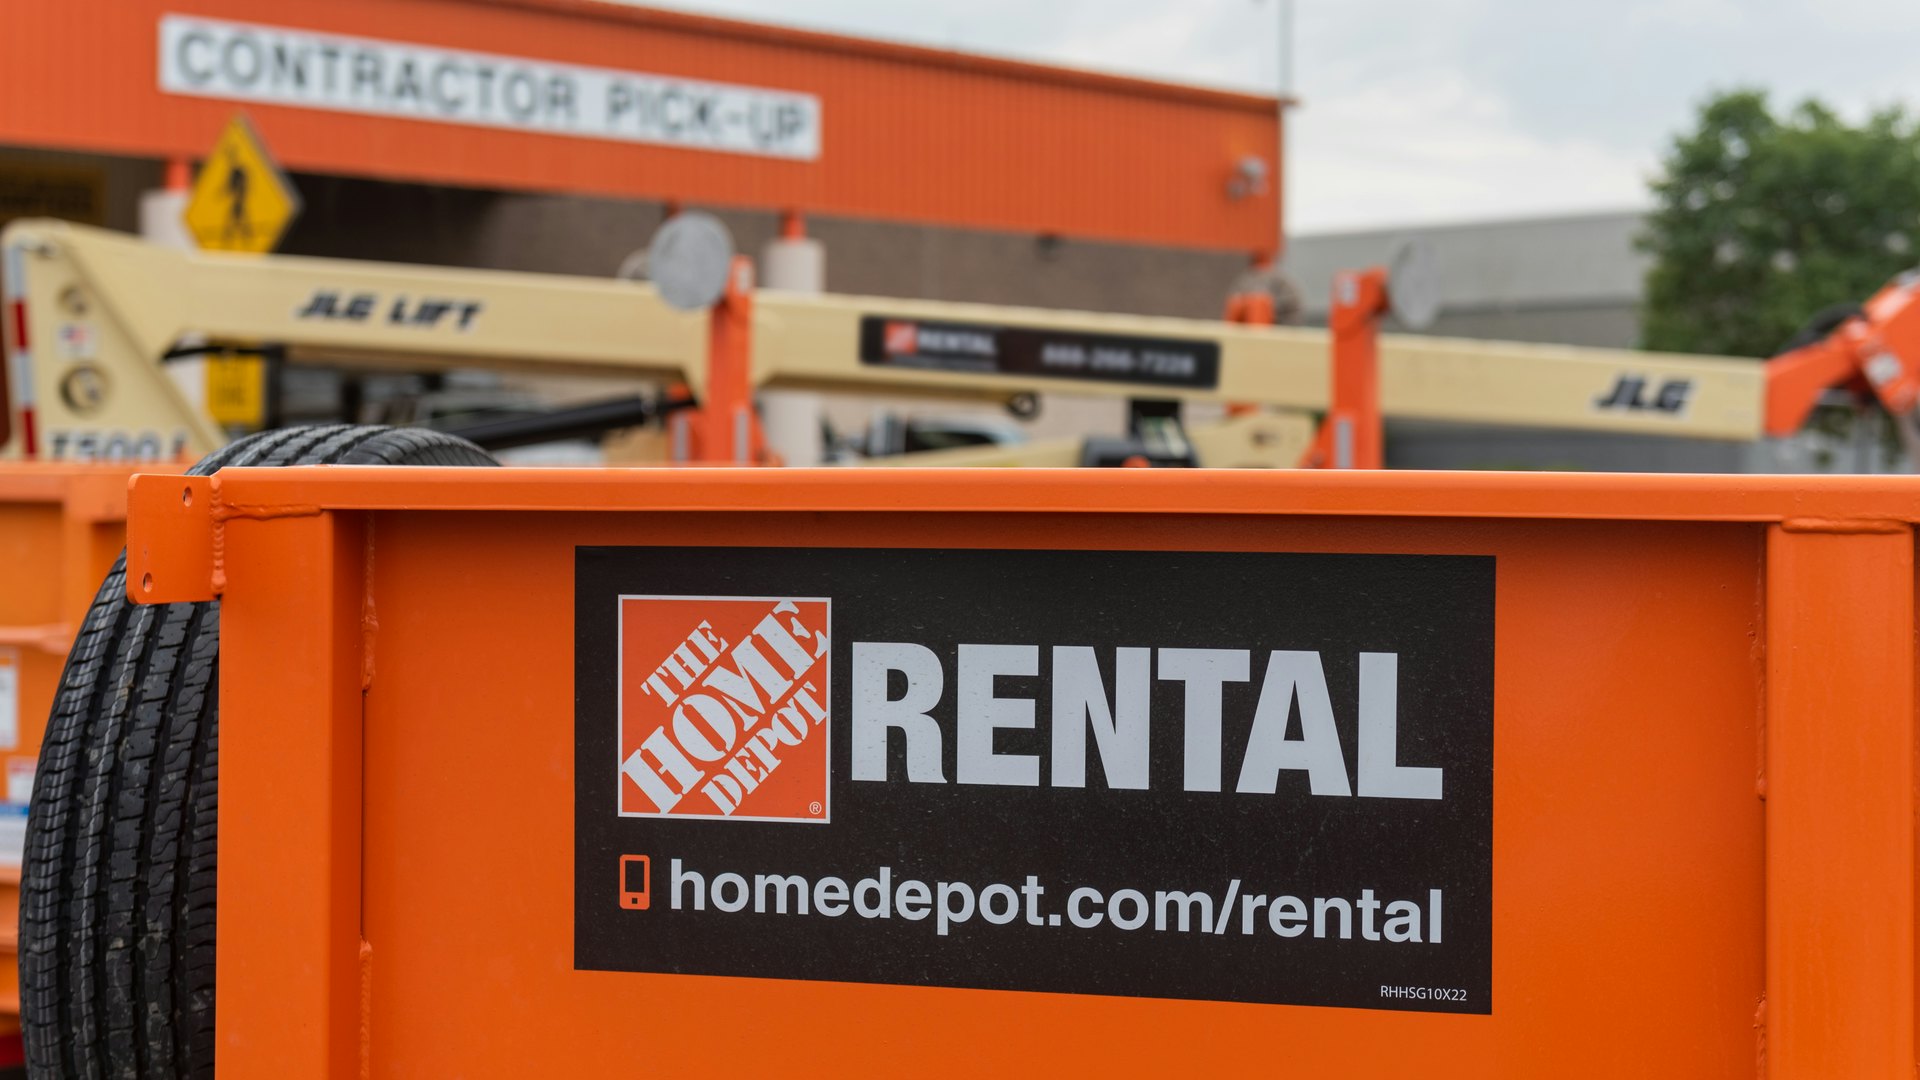 The Home Depot Rental Opens New Rental Centers Operations Facilities For Construction Pros